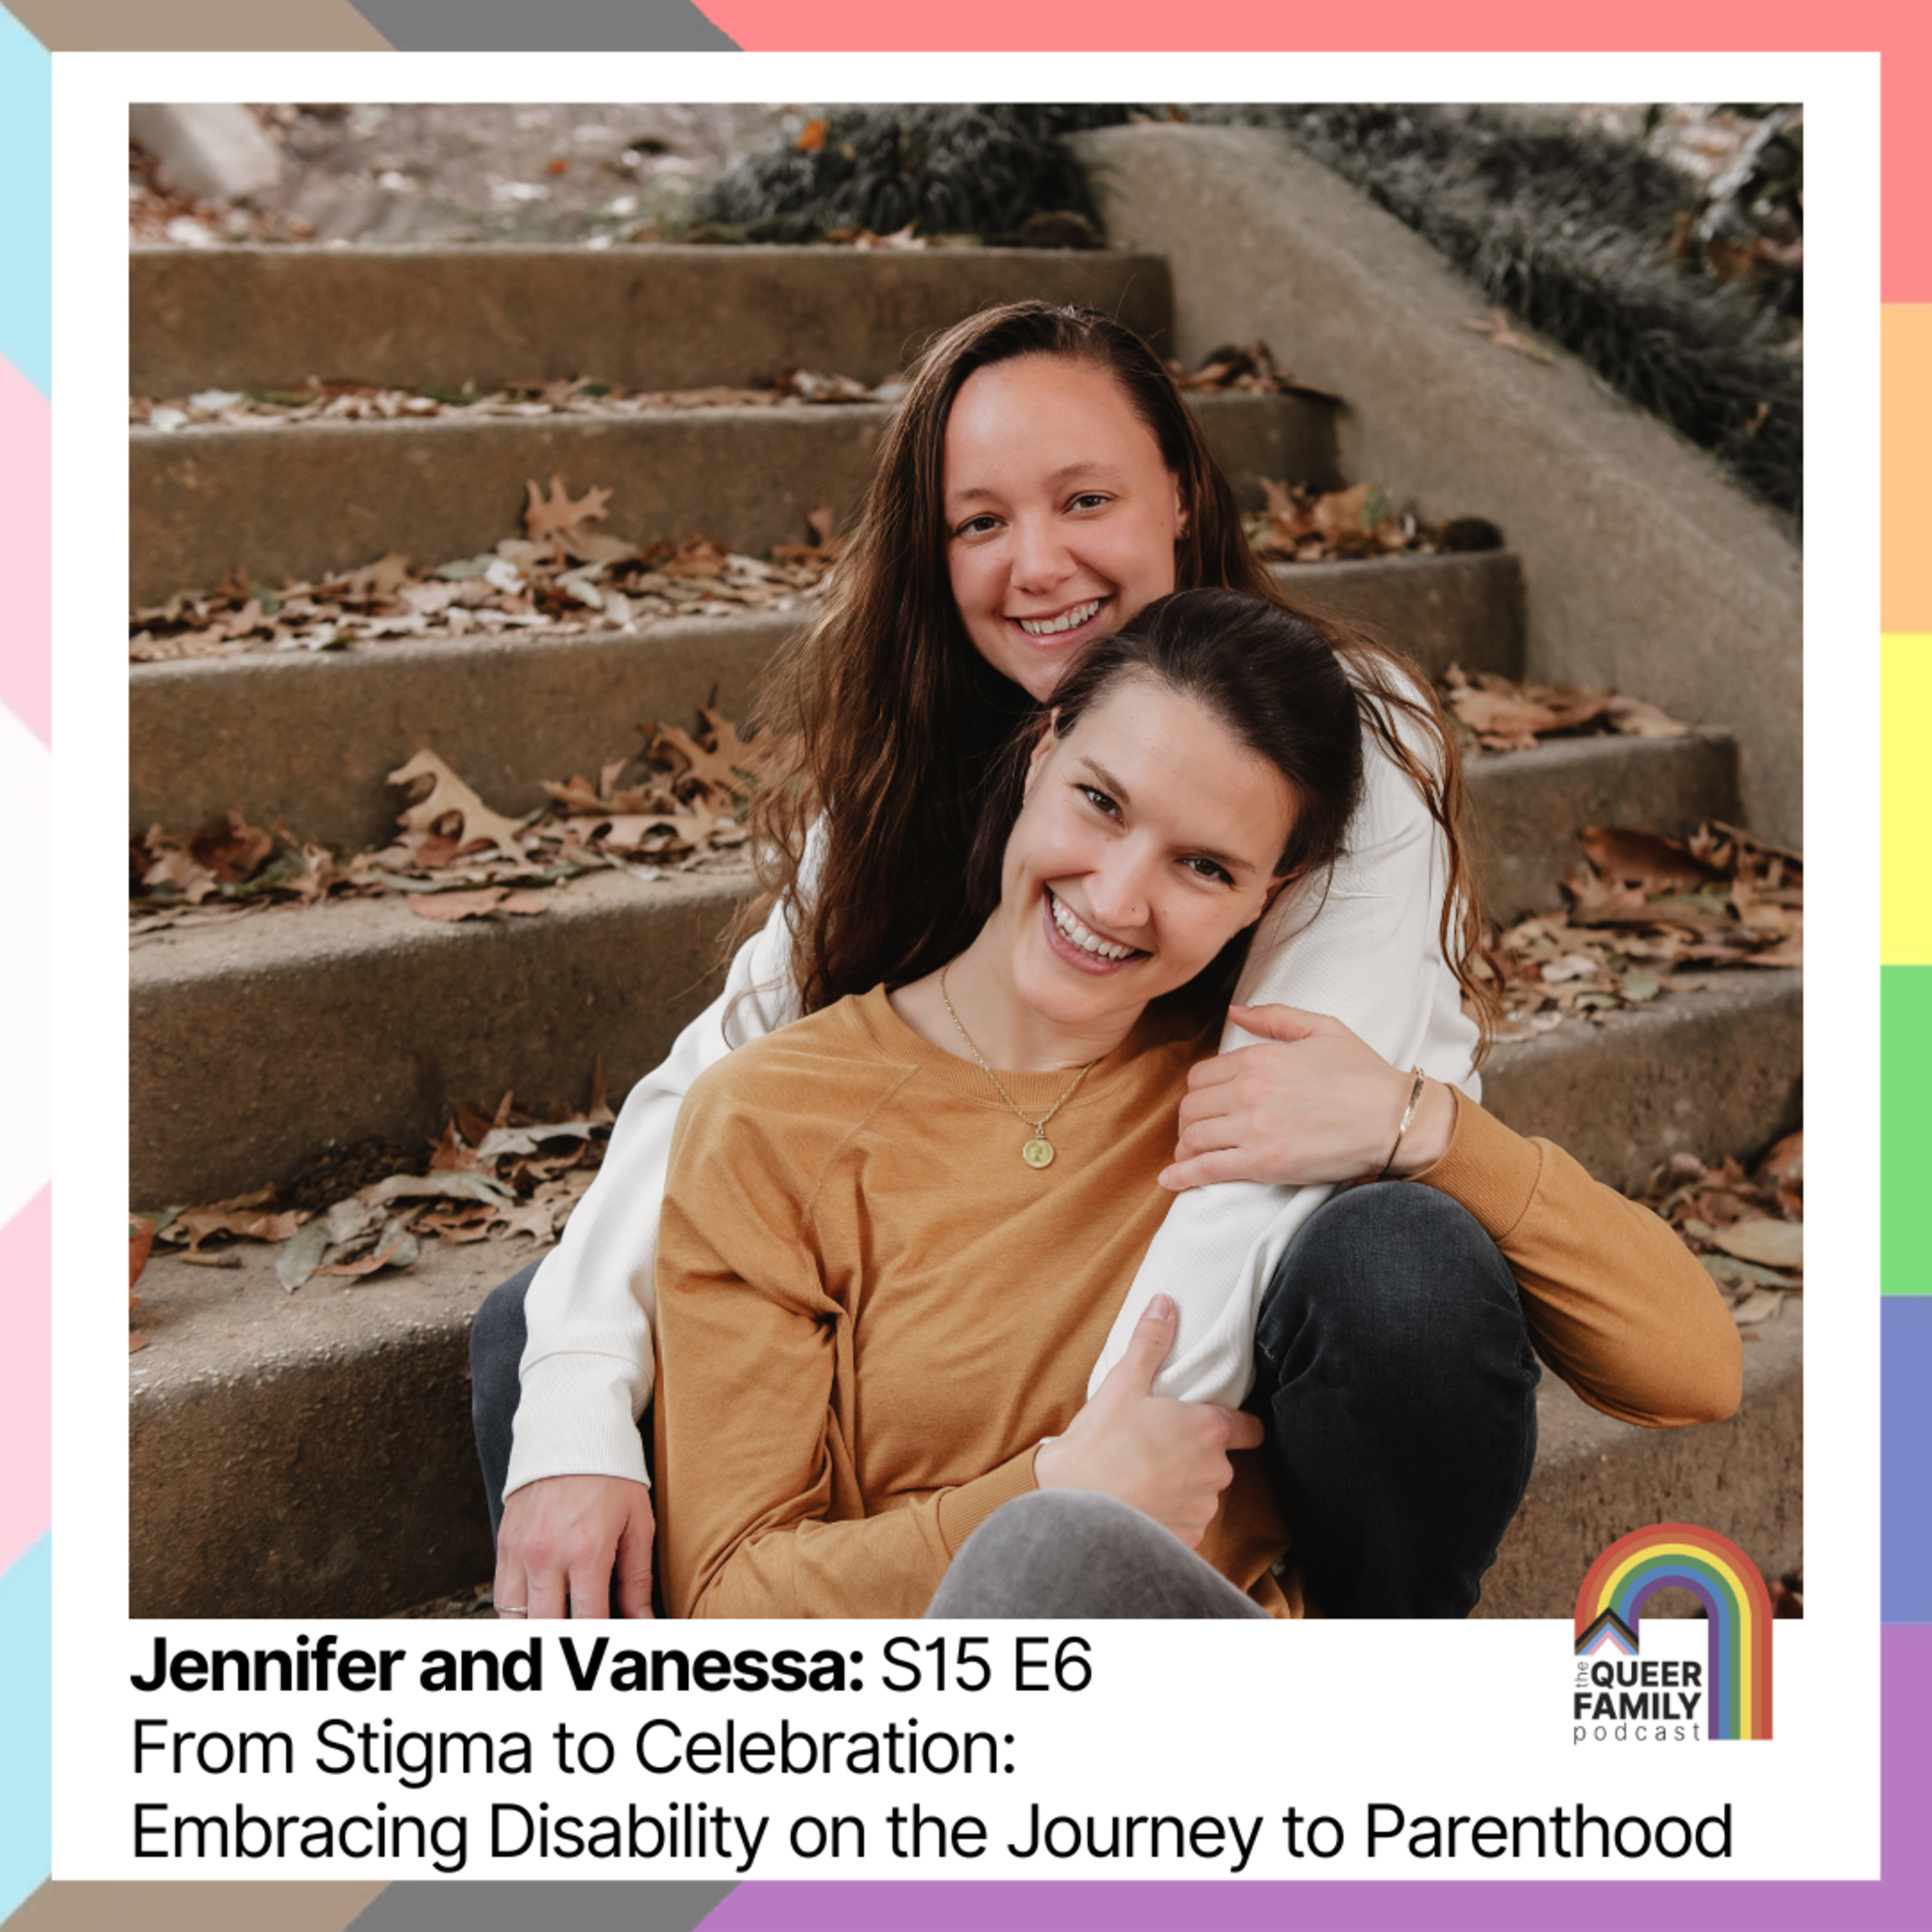 From Stigma to Celebration: Embracing Disability on the Journey to Parenthood